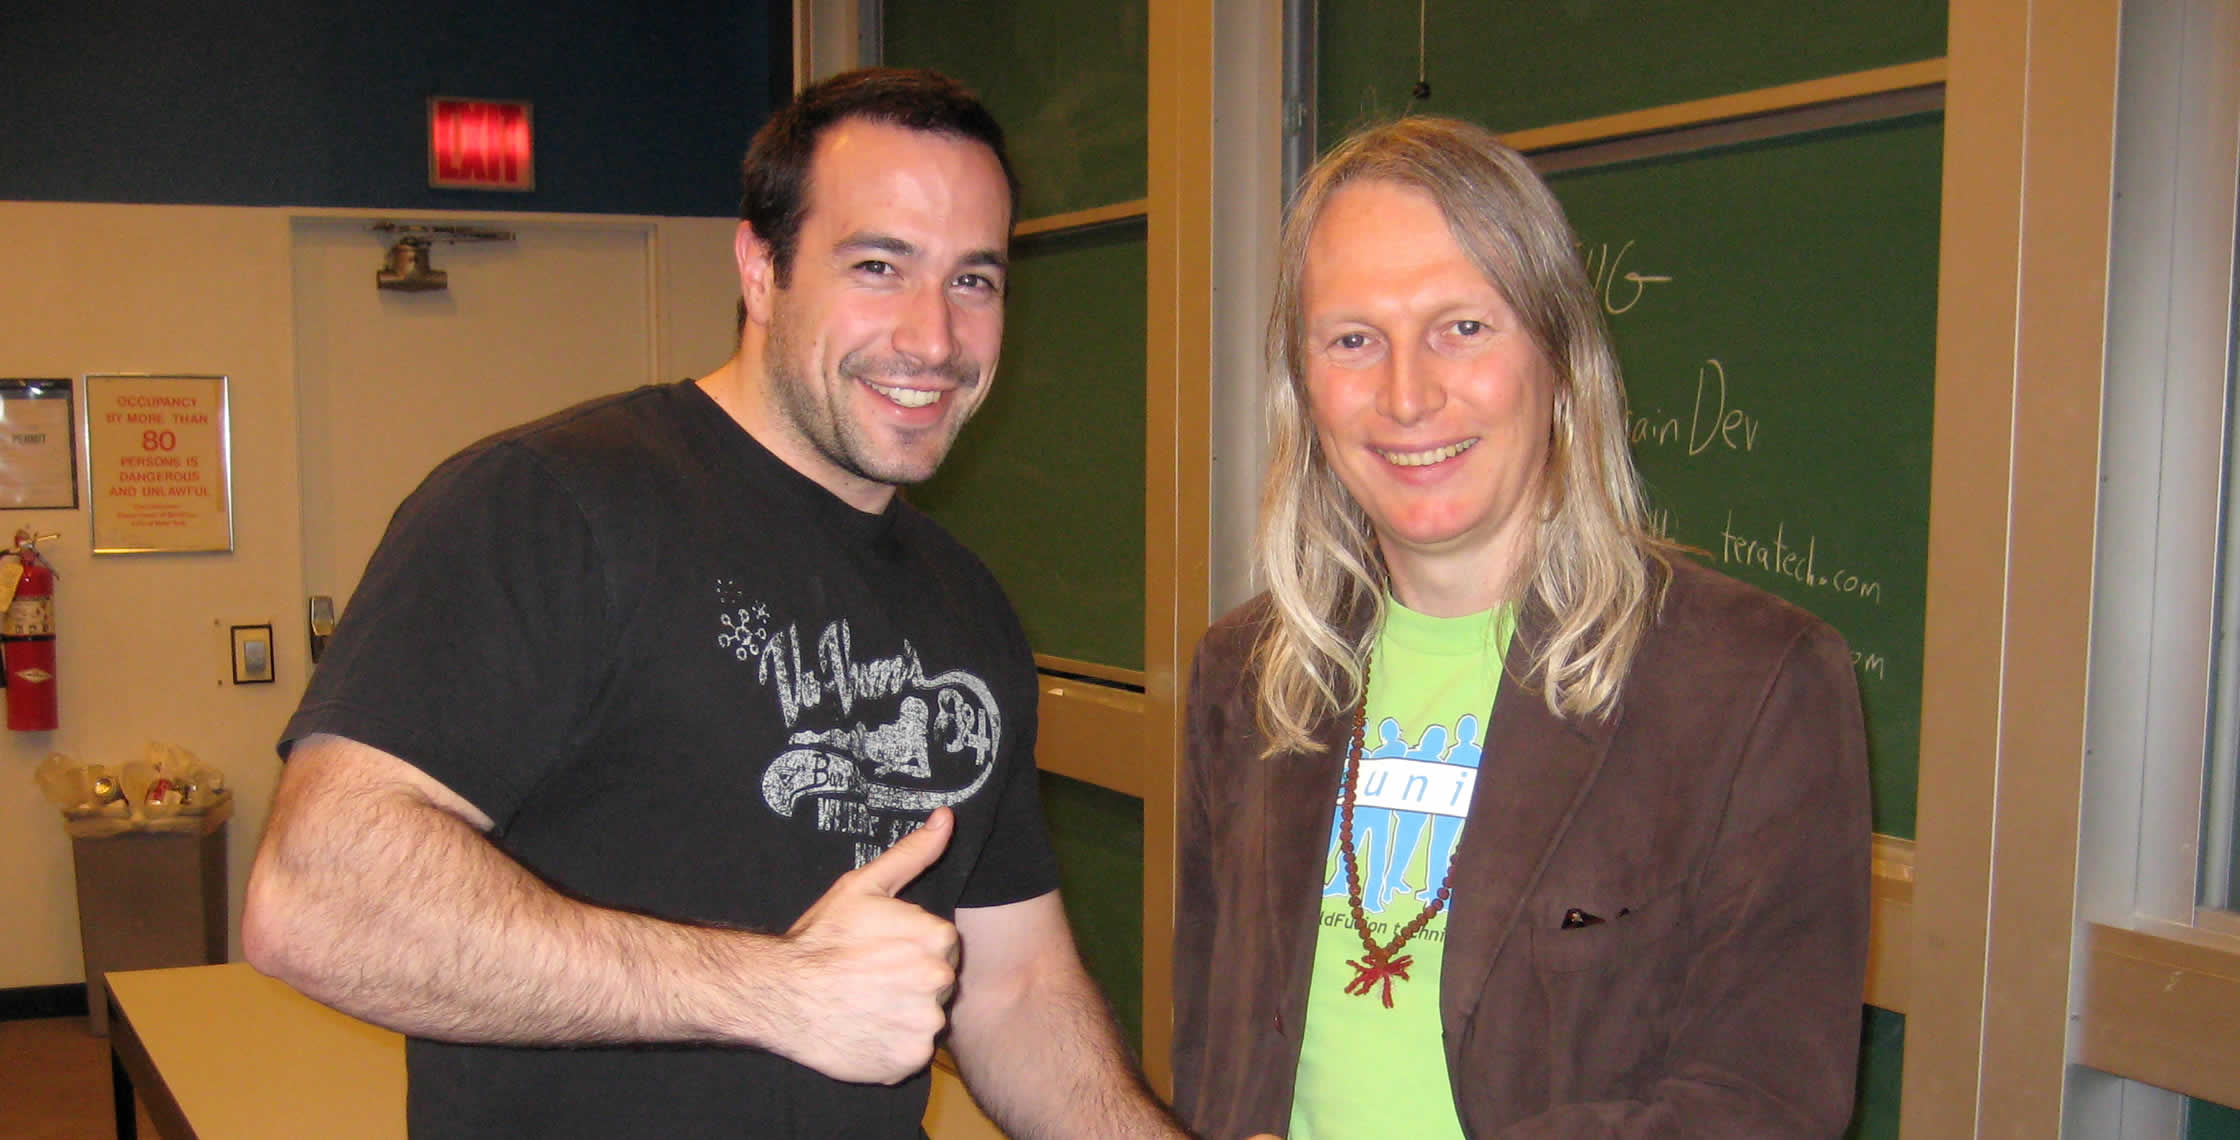 Ben Nadel at the New York ColdFusion User Group (May. 2008) with: Michaela Light